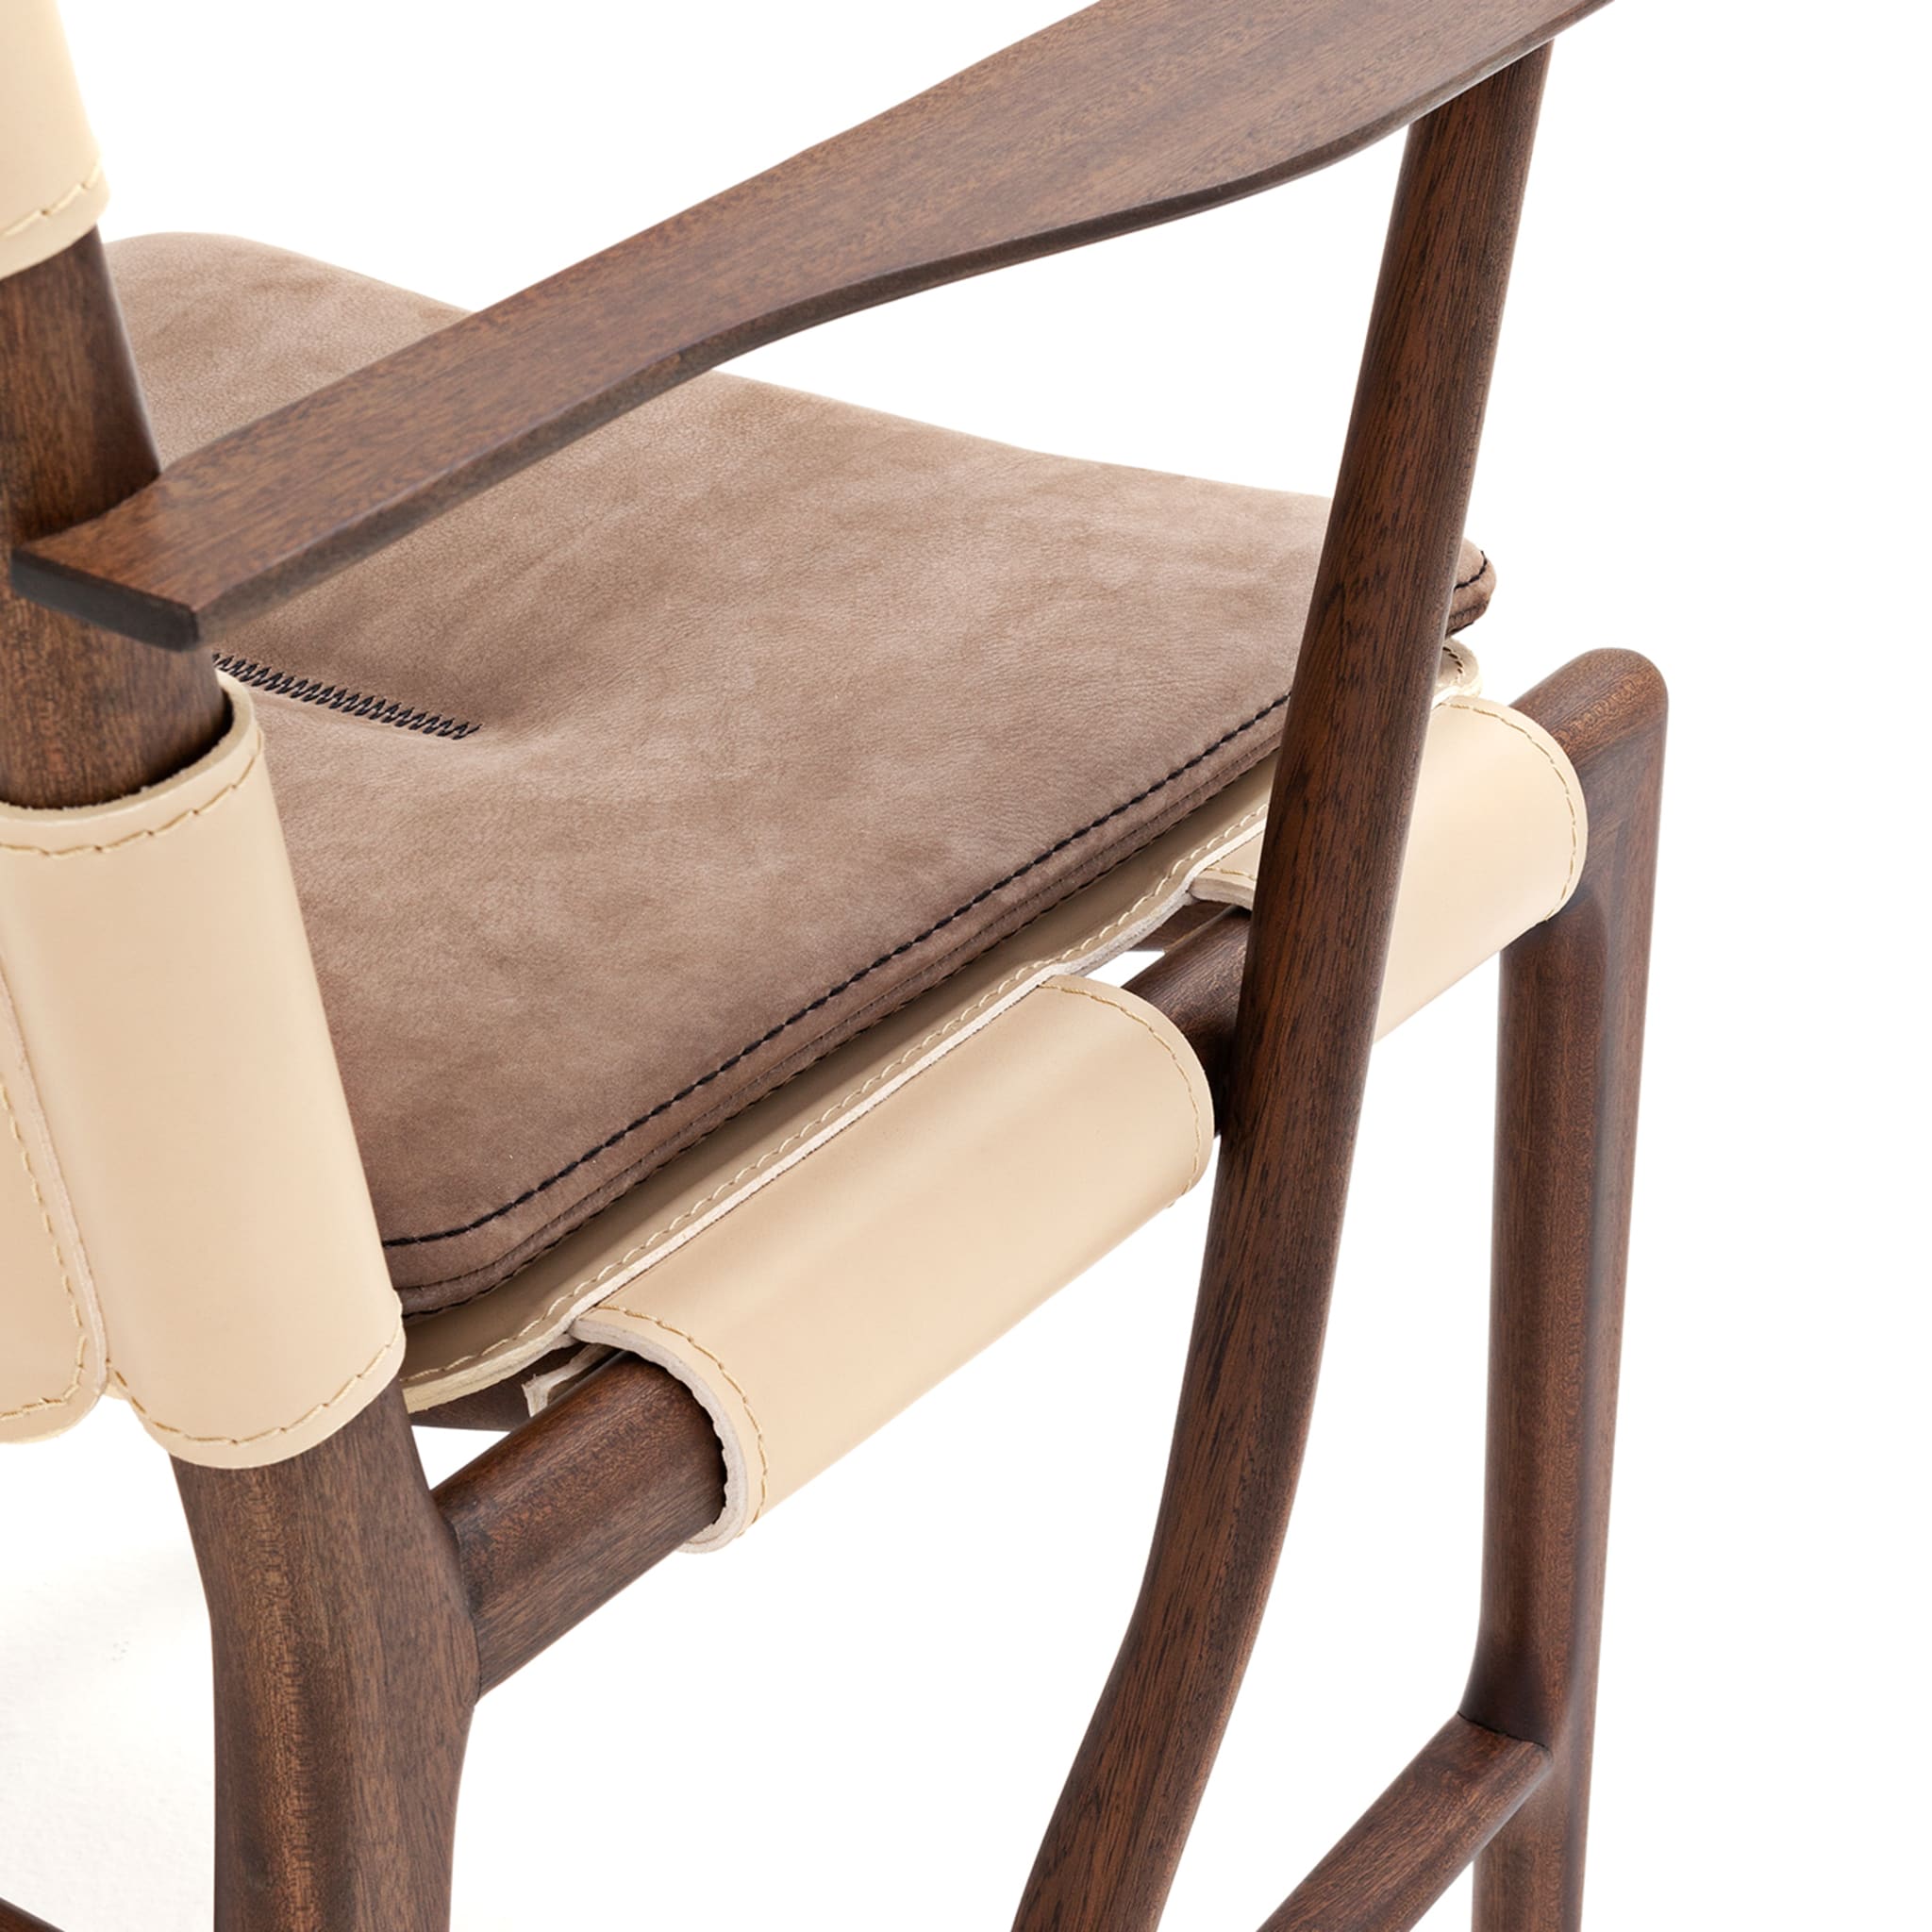 Levante Beige Chair with Armrests by Massimo Castagna - Alternative view 2